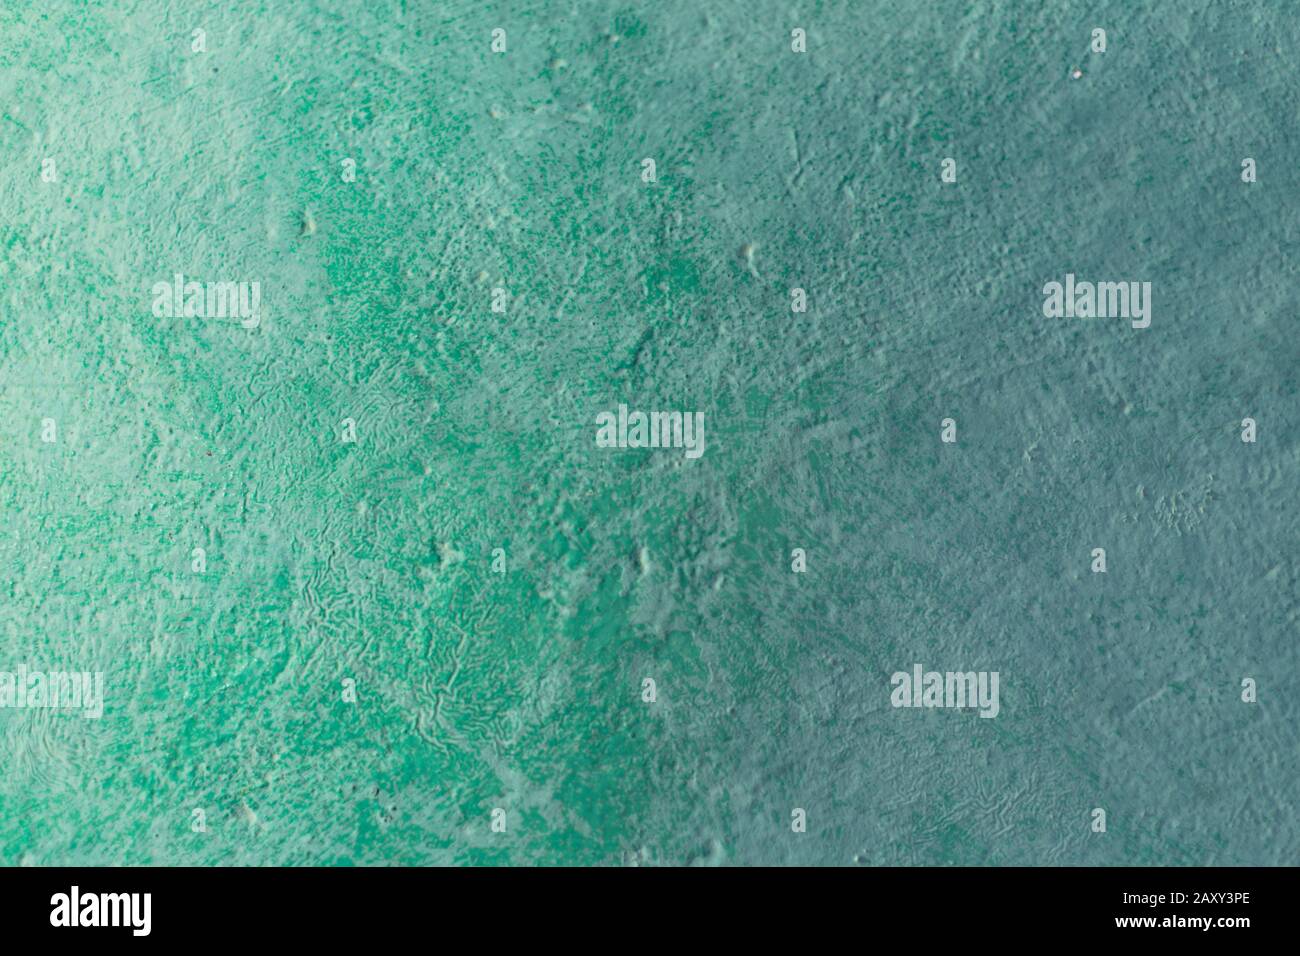 Empty graded emerald surface backdrop or background for text. Stock Photo